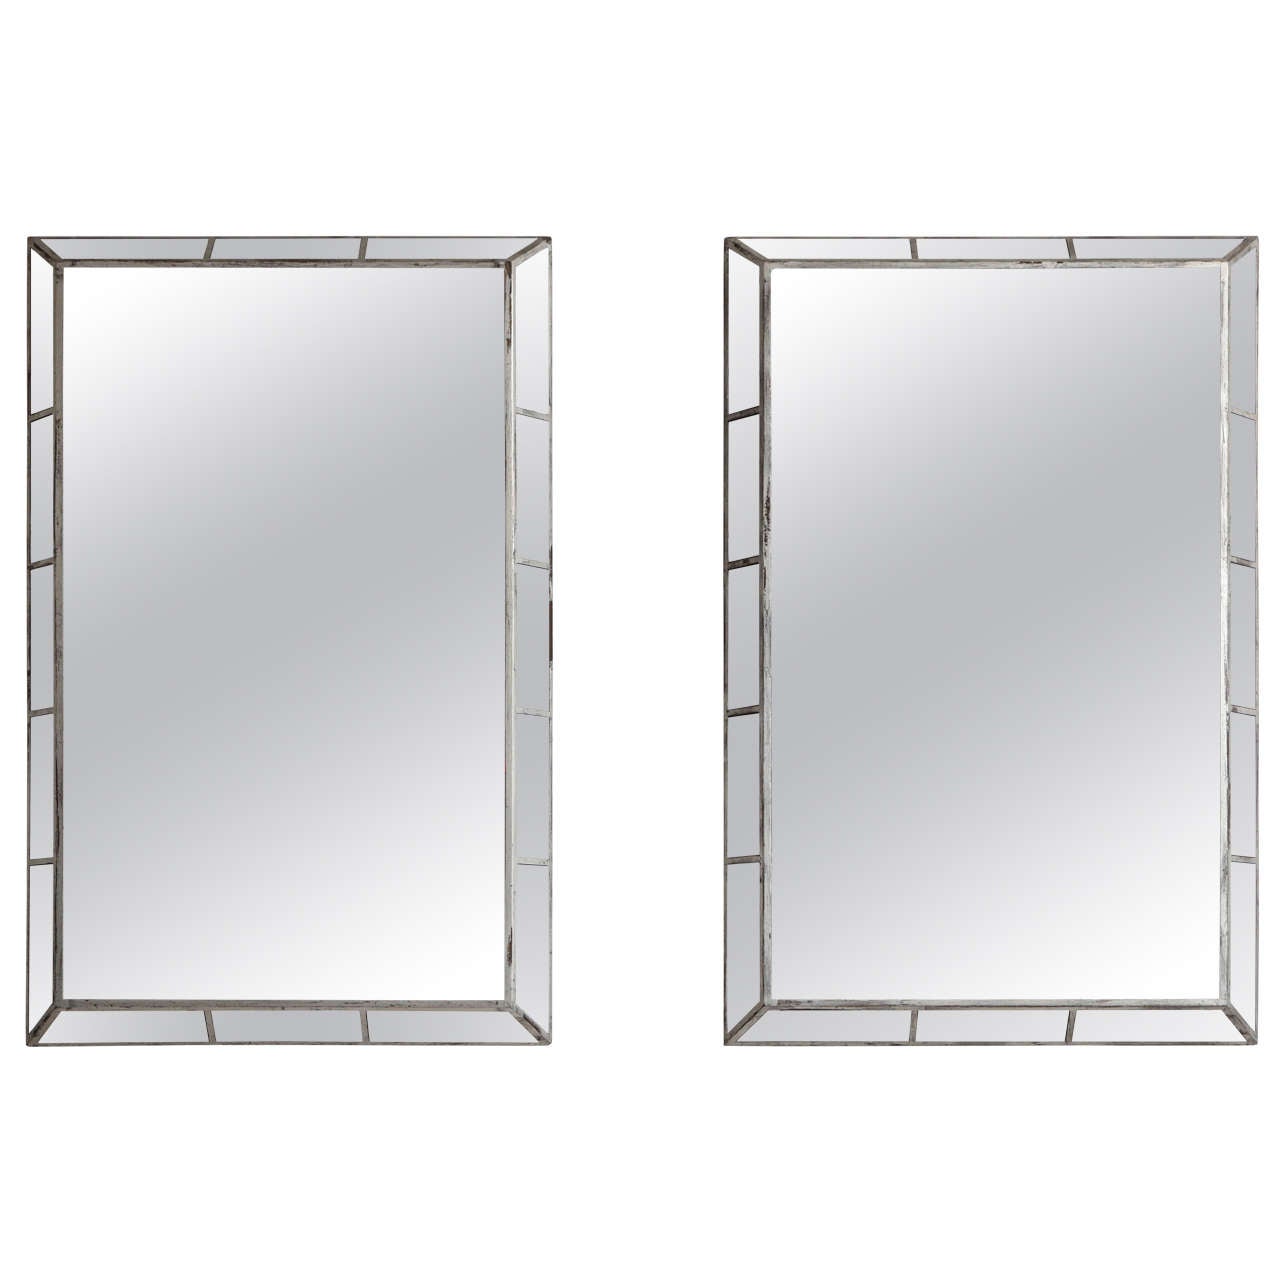 Pair of Mid-20th Century Mirrors within Silverwood frames